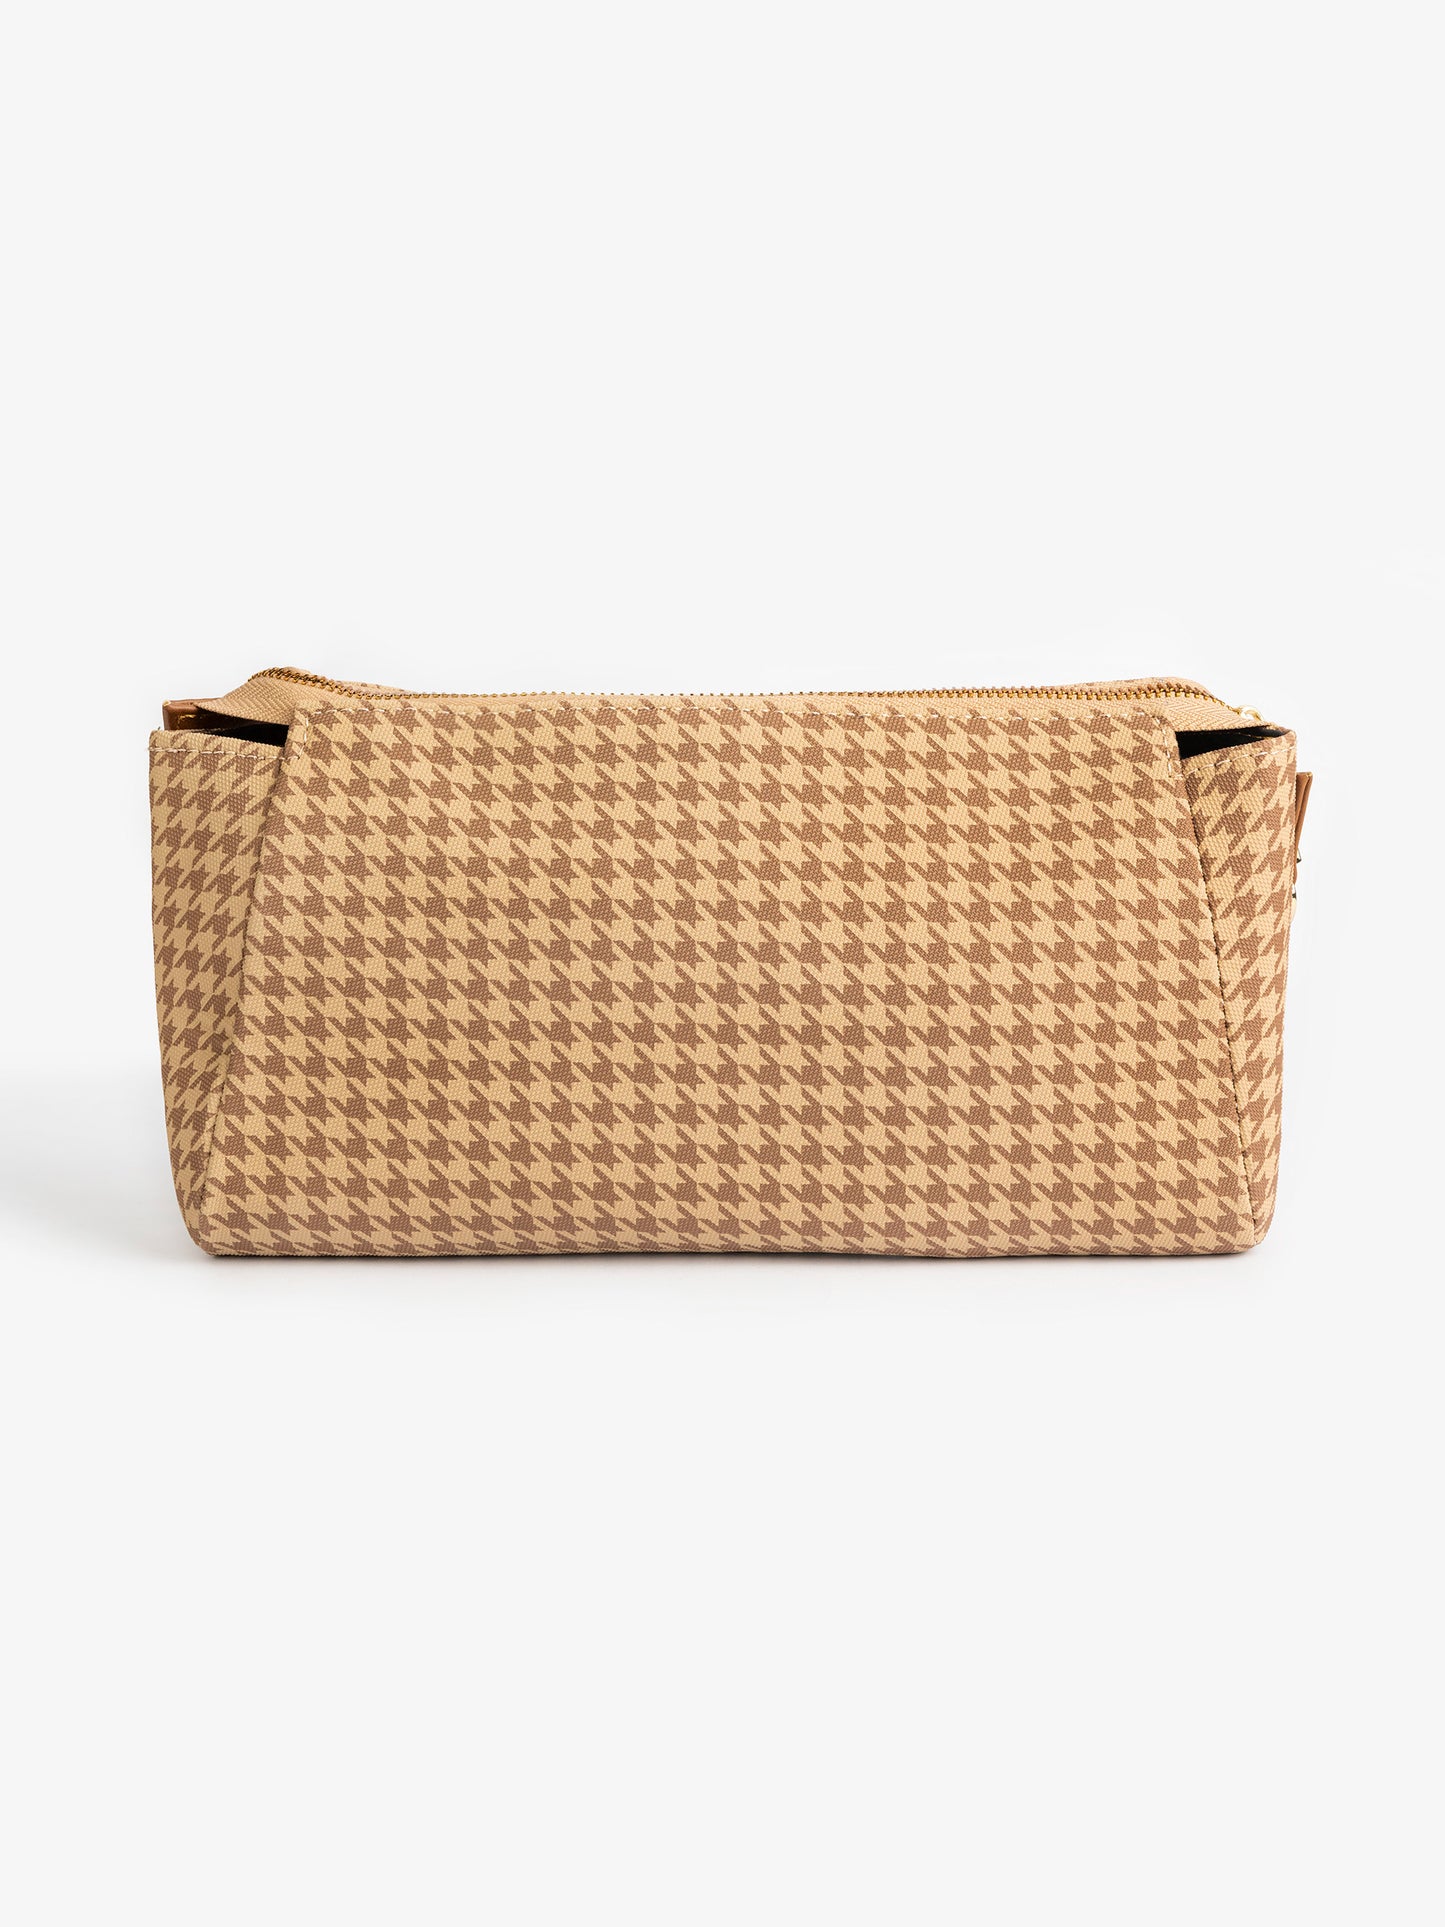 Hounds tooth Printed Clutch